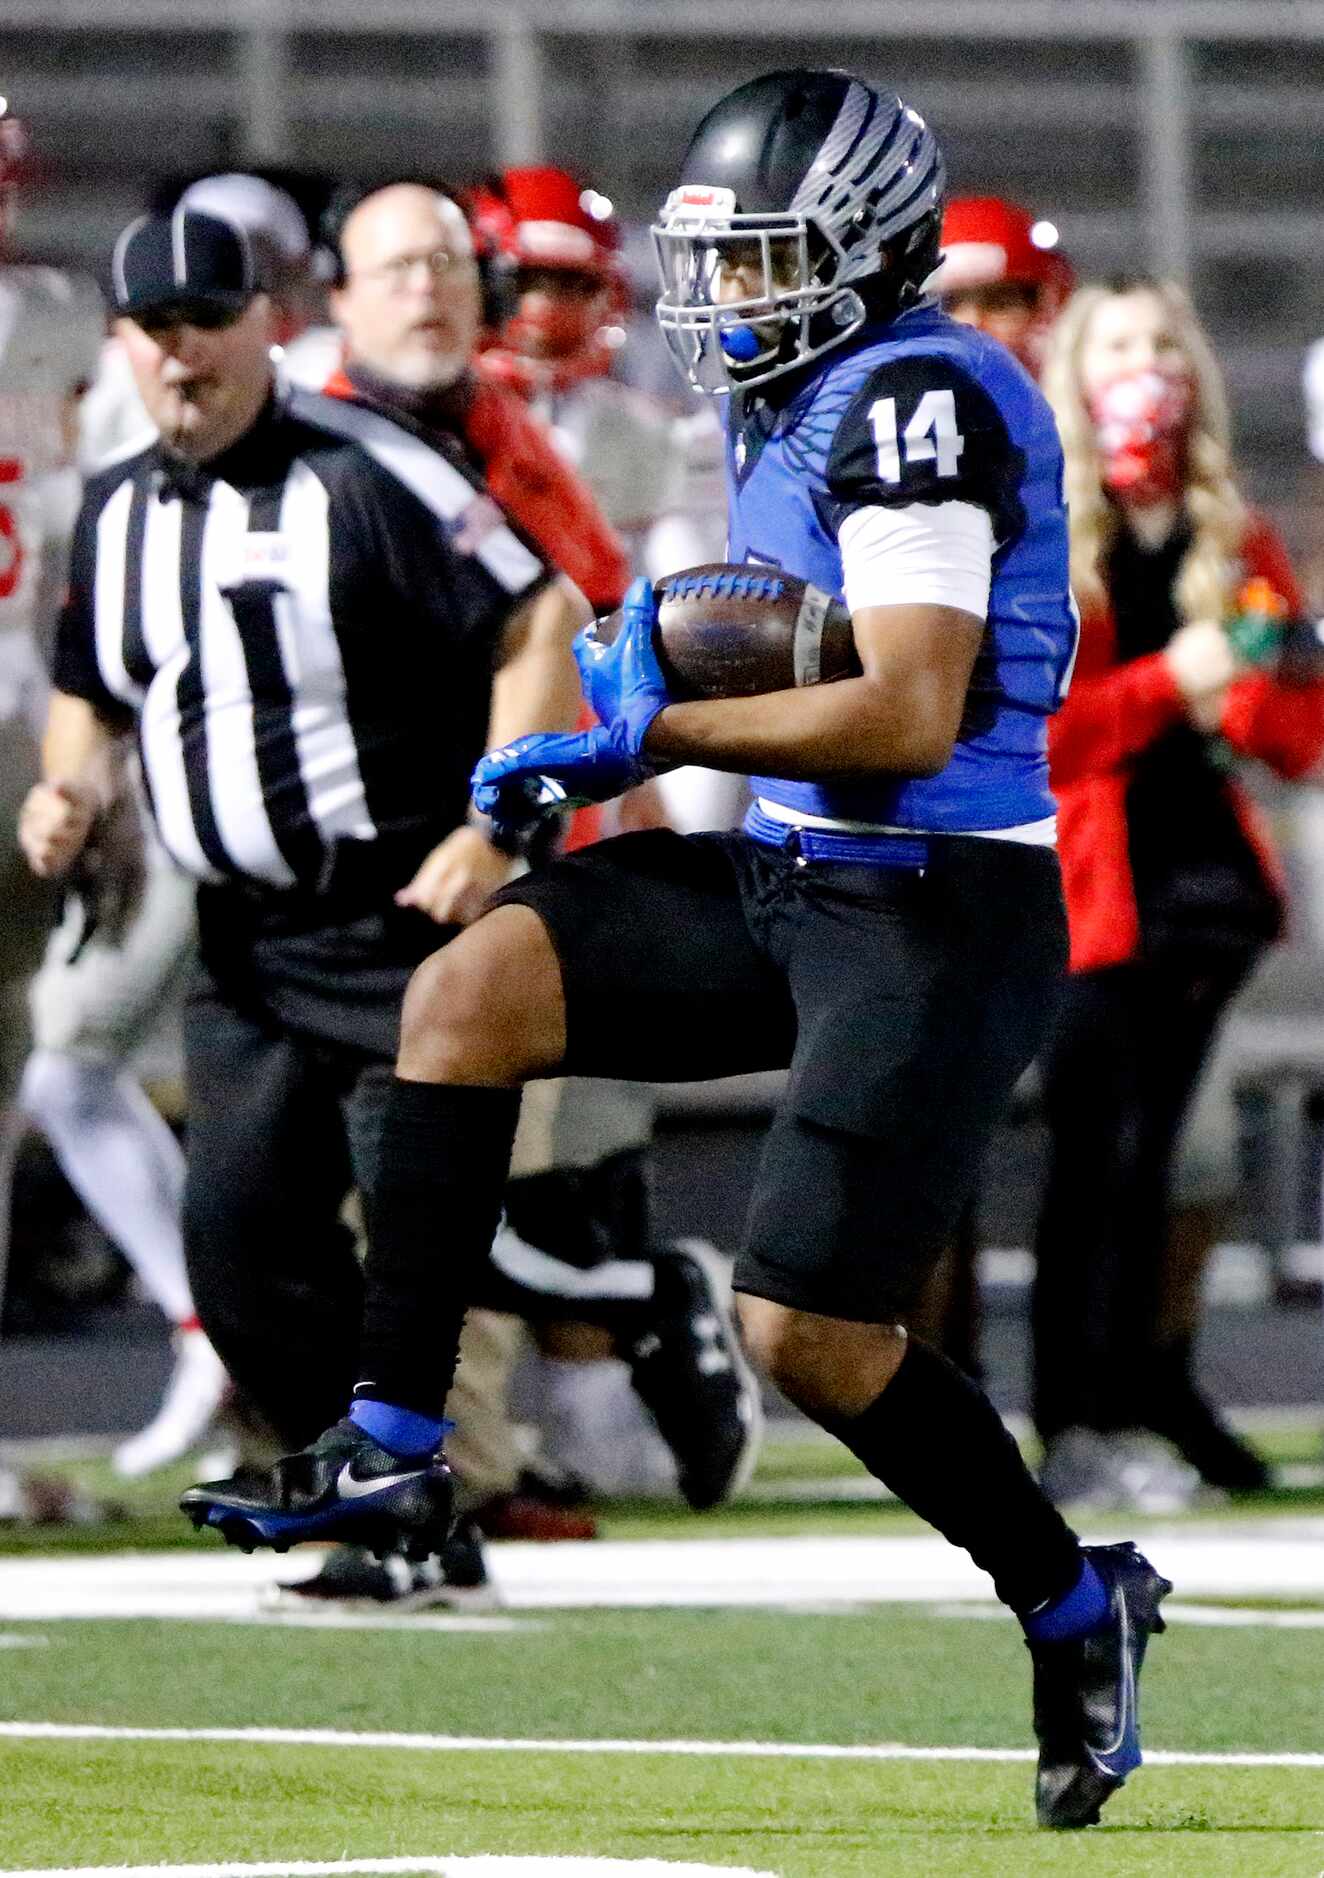 North Forney High School wide receiver Lemarcus Kirk (14) makes a big gain after the catch...